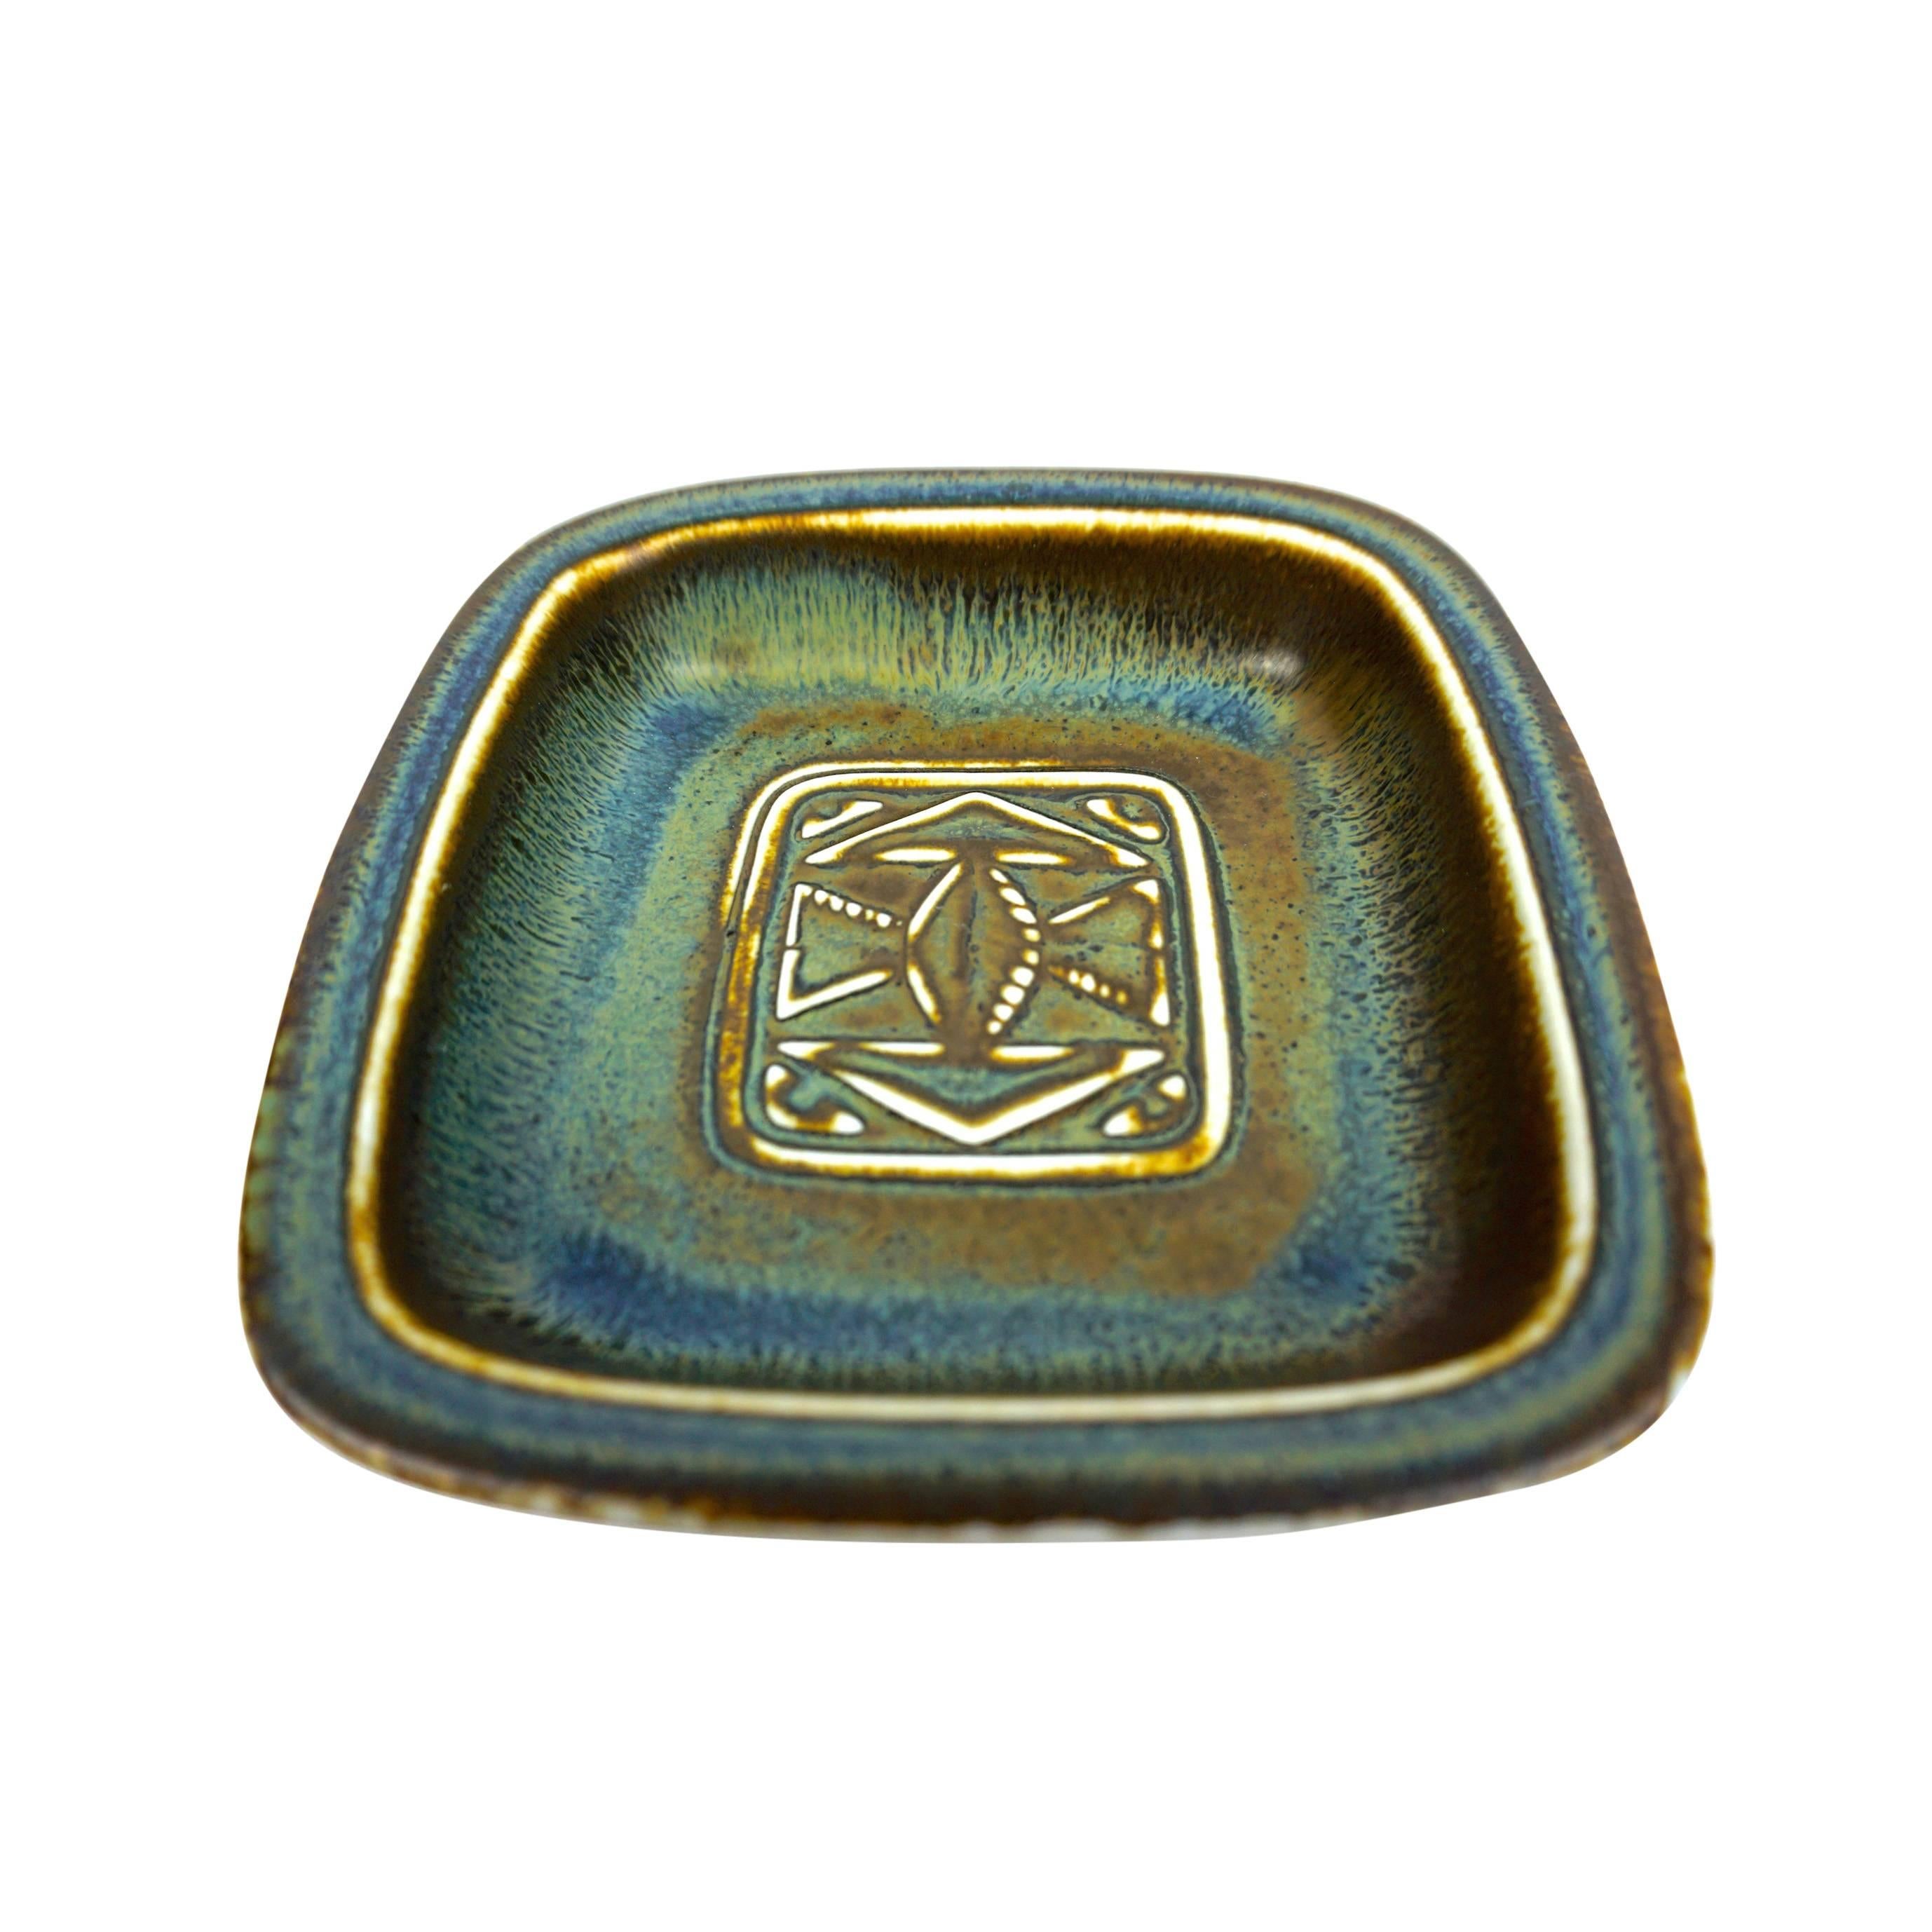 Ceramic tray designed by Gunnar Nylund, produced by Rörstrand in Sweden. 
Dimensions: W 14 x D 13 x H 2.8 (front) 3.2 (back) cm.